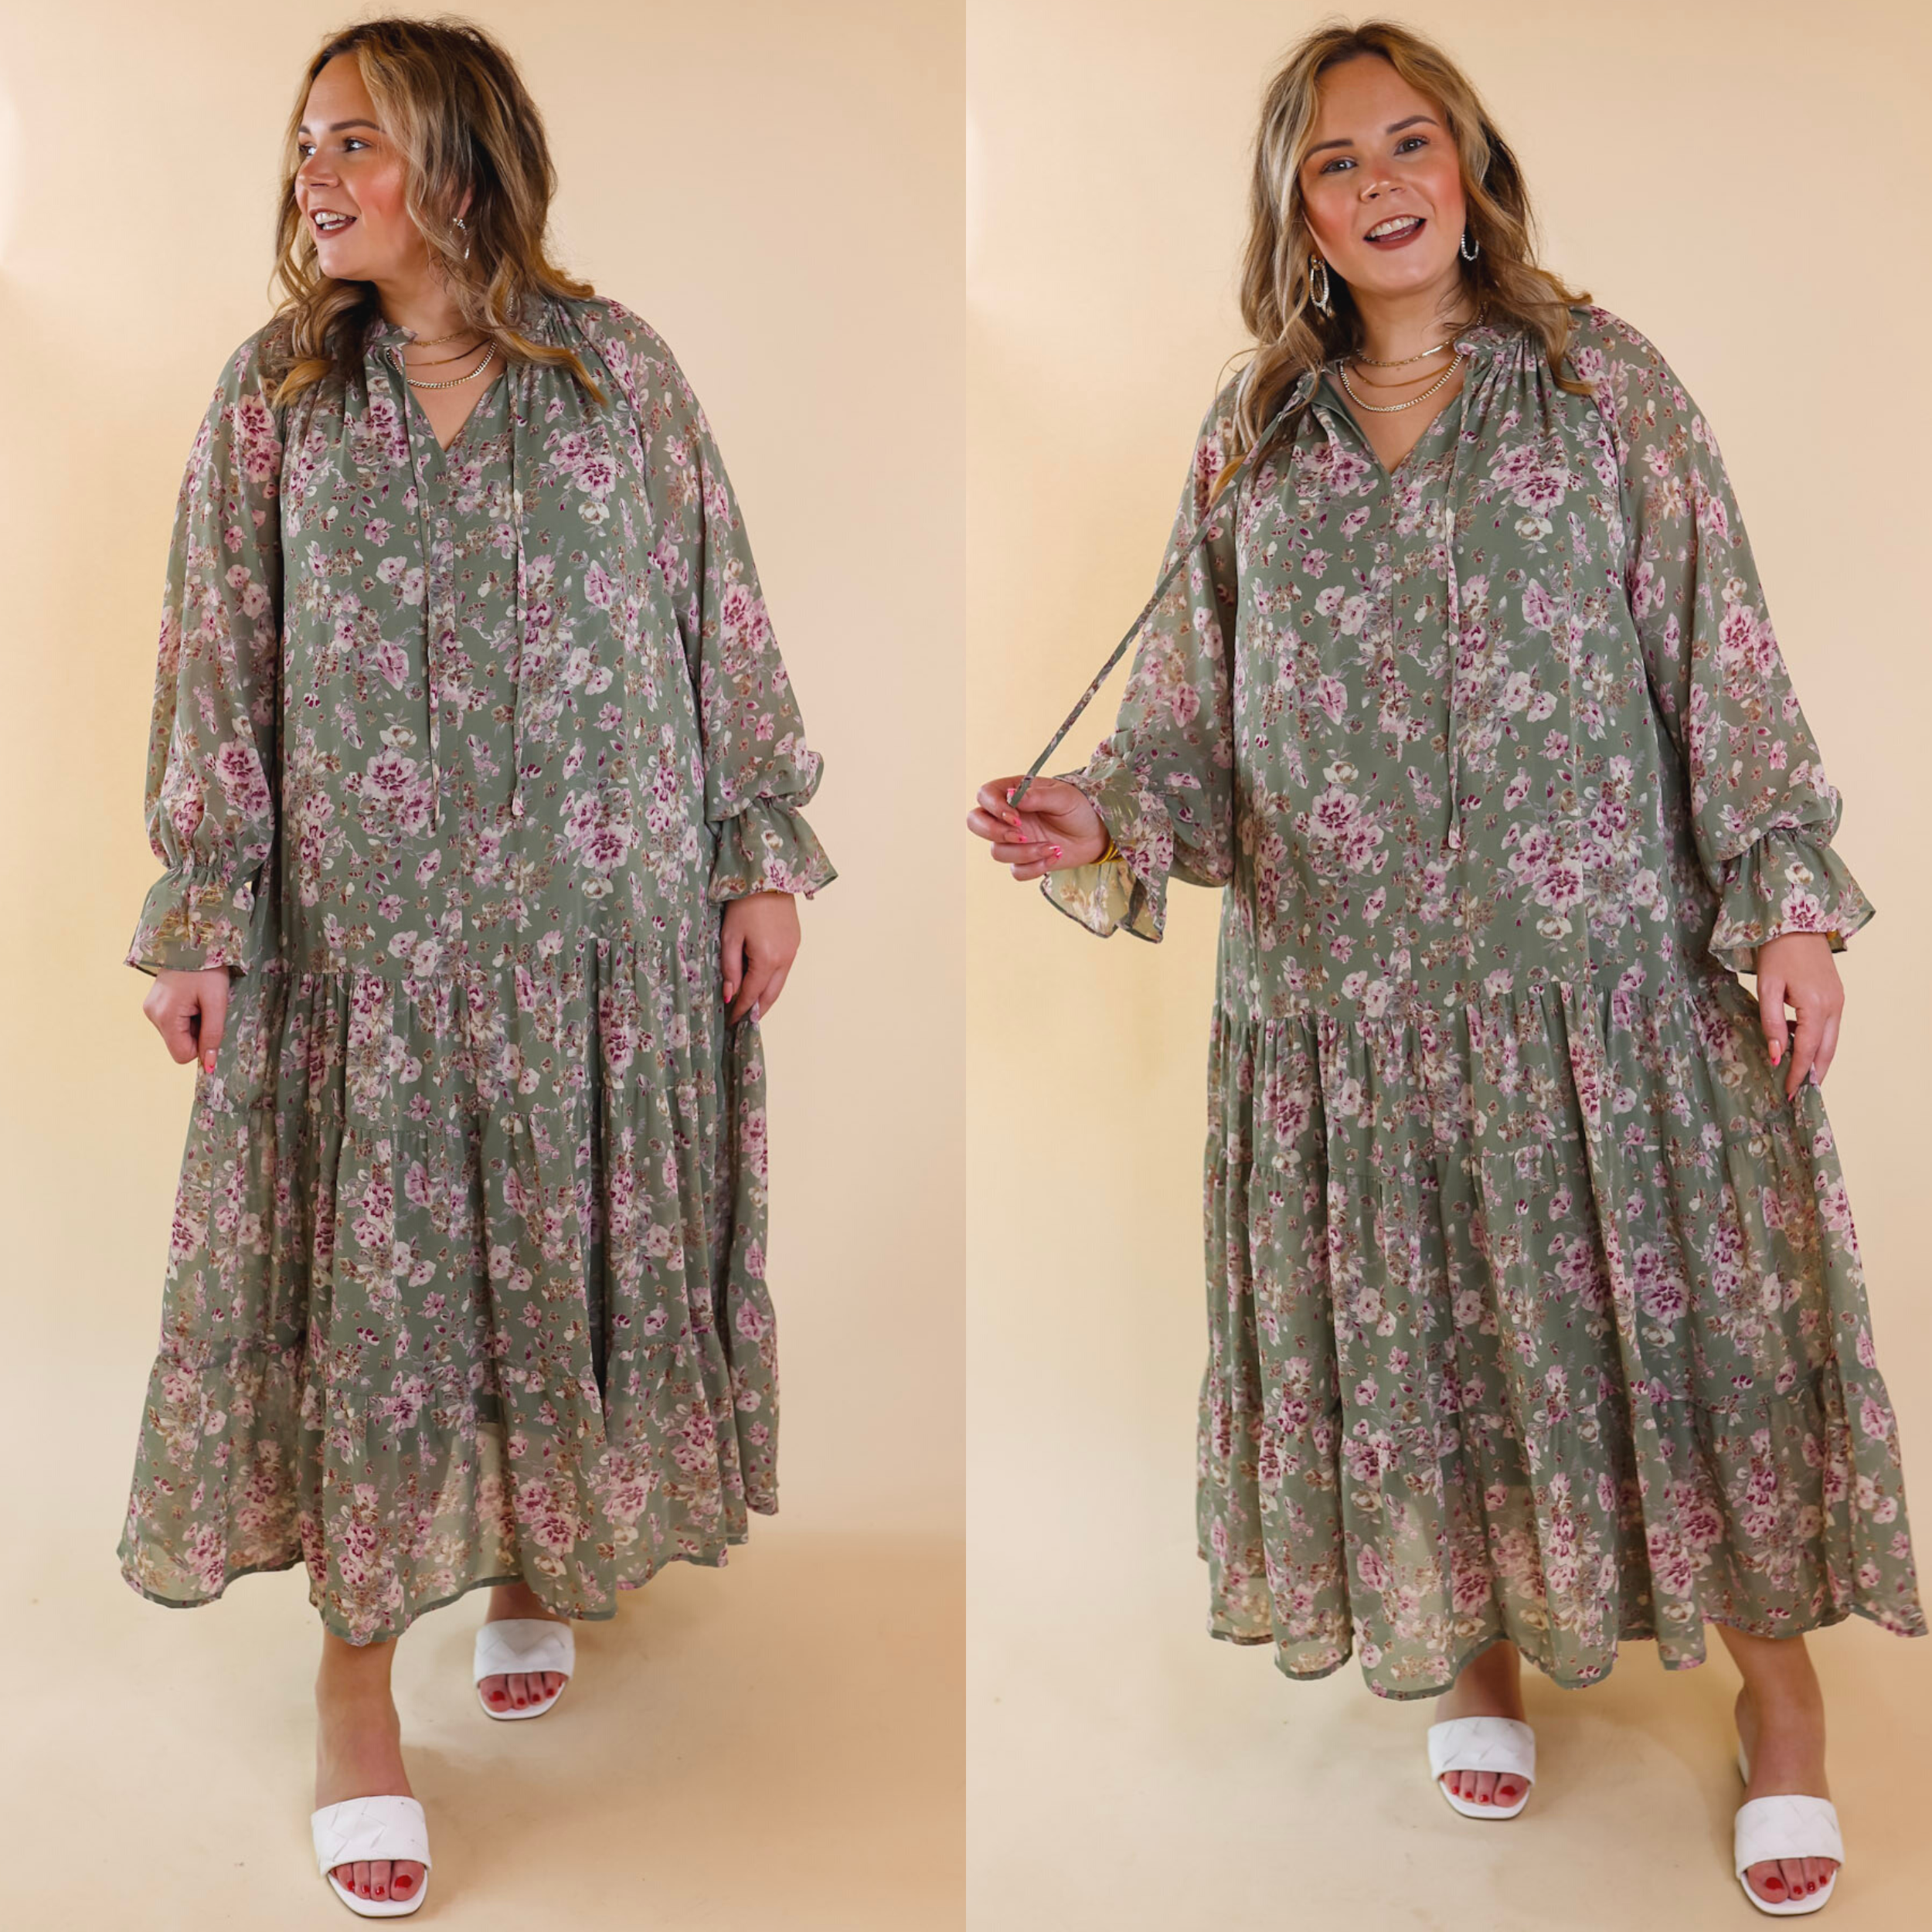 Tuscan Nights Long Sleeve High Neck Floral Midi Dress in Sage - Giddy Up Glamour Boutique